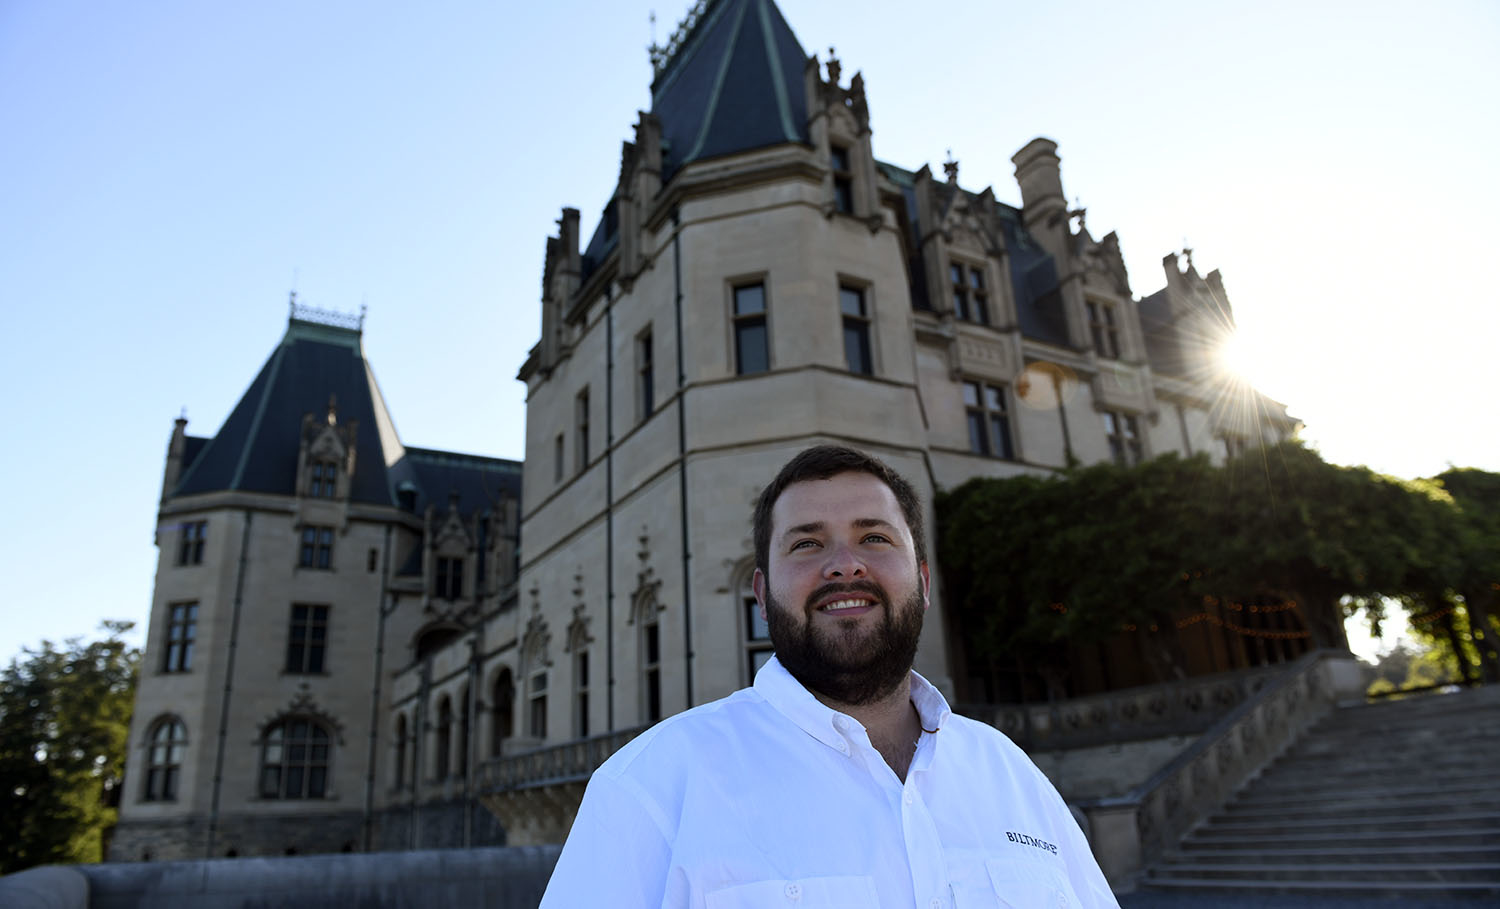 A bearded man stands in the foreground with Biltmore House behind him.